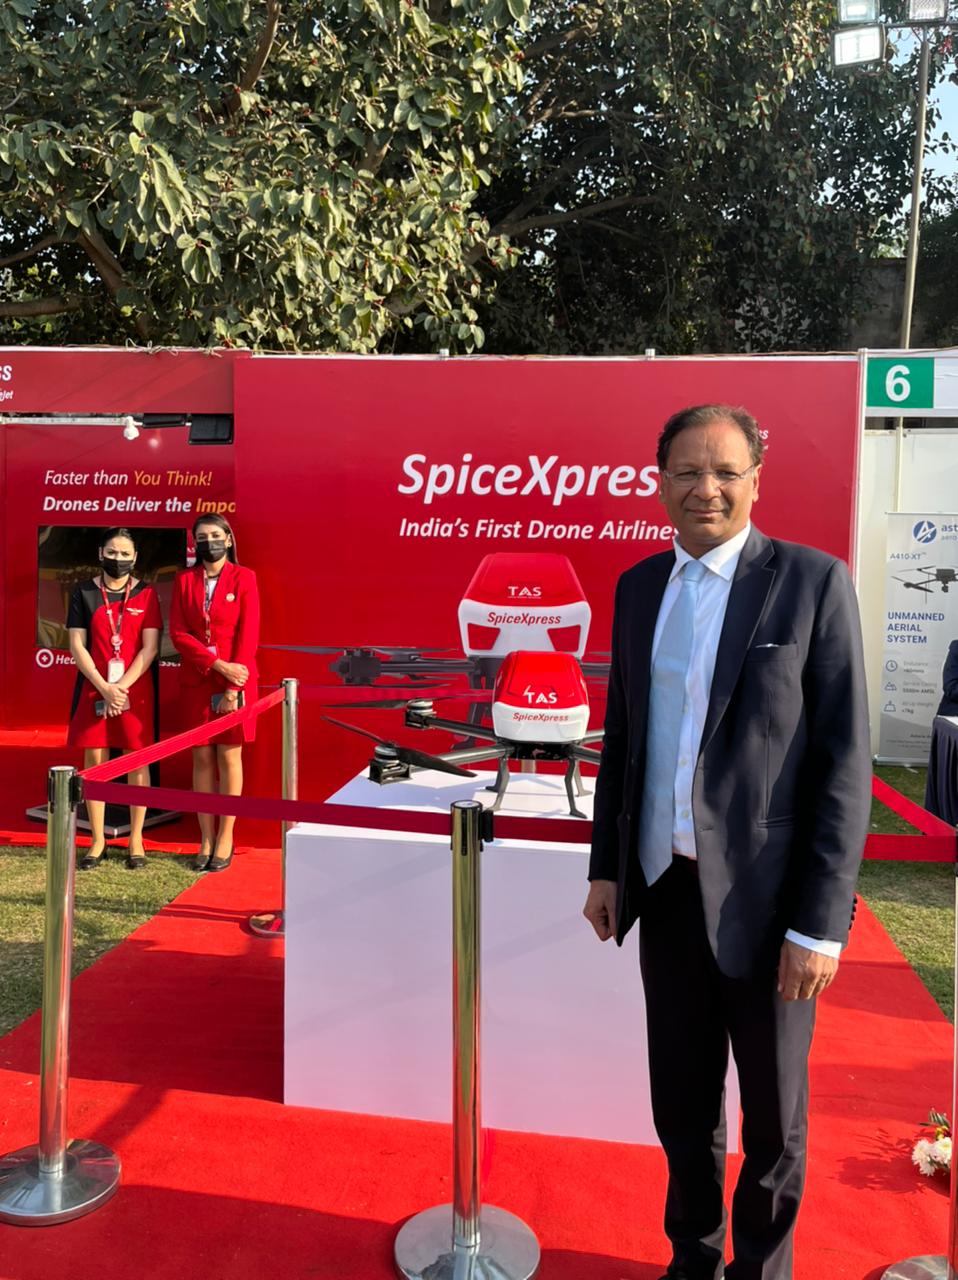 SpiceJet showcases its Drone delivery capabilities at the Gwalior Drone Mela